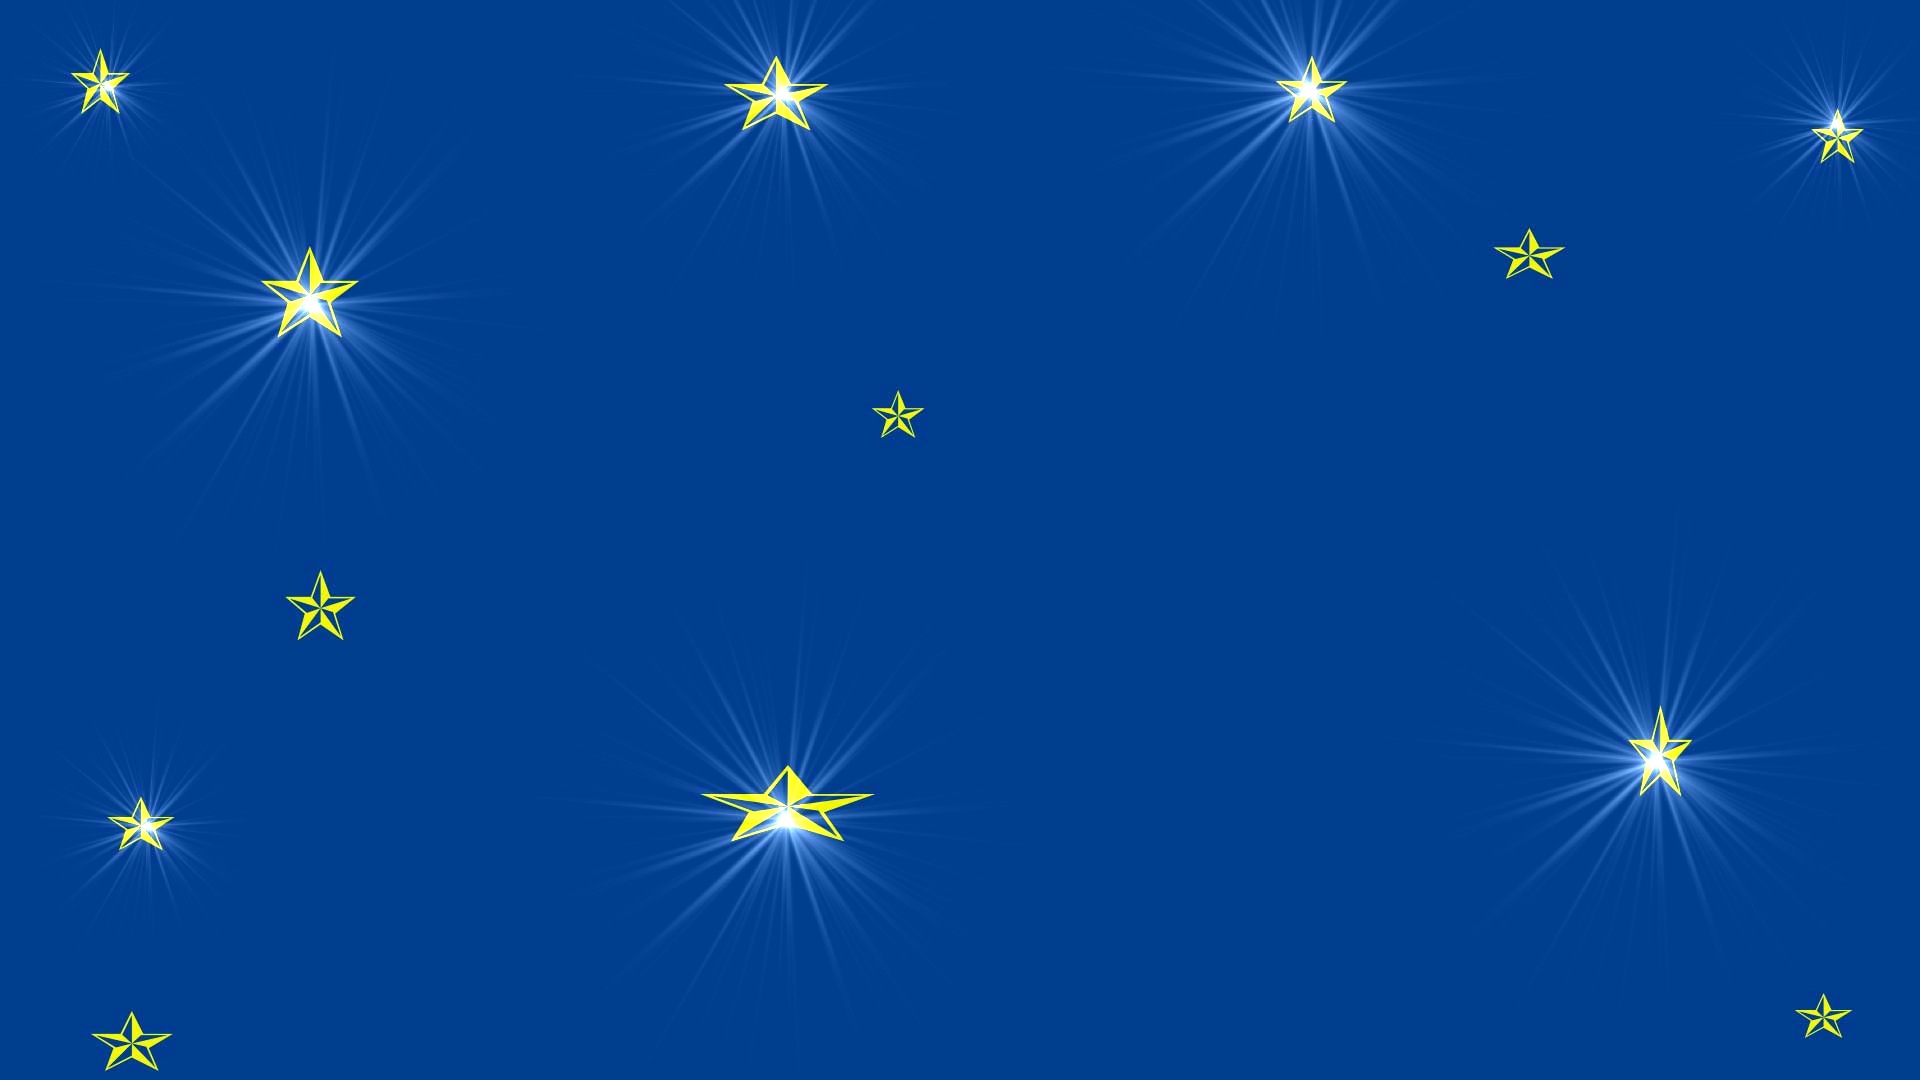 Bright Blue Background Gold Stars Flares